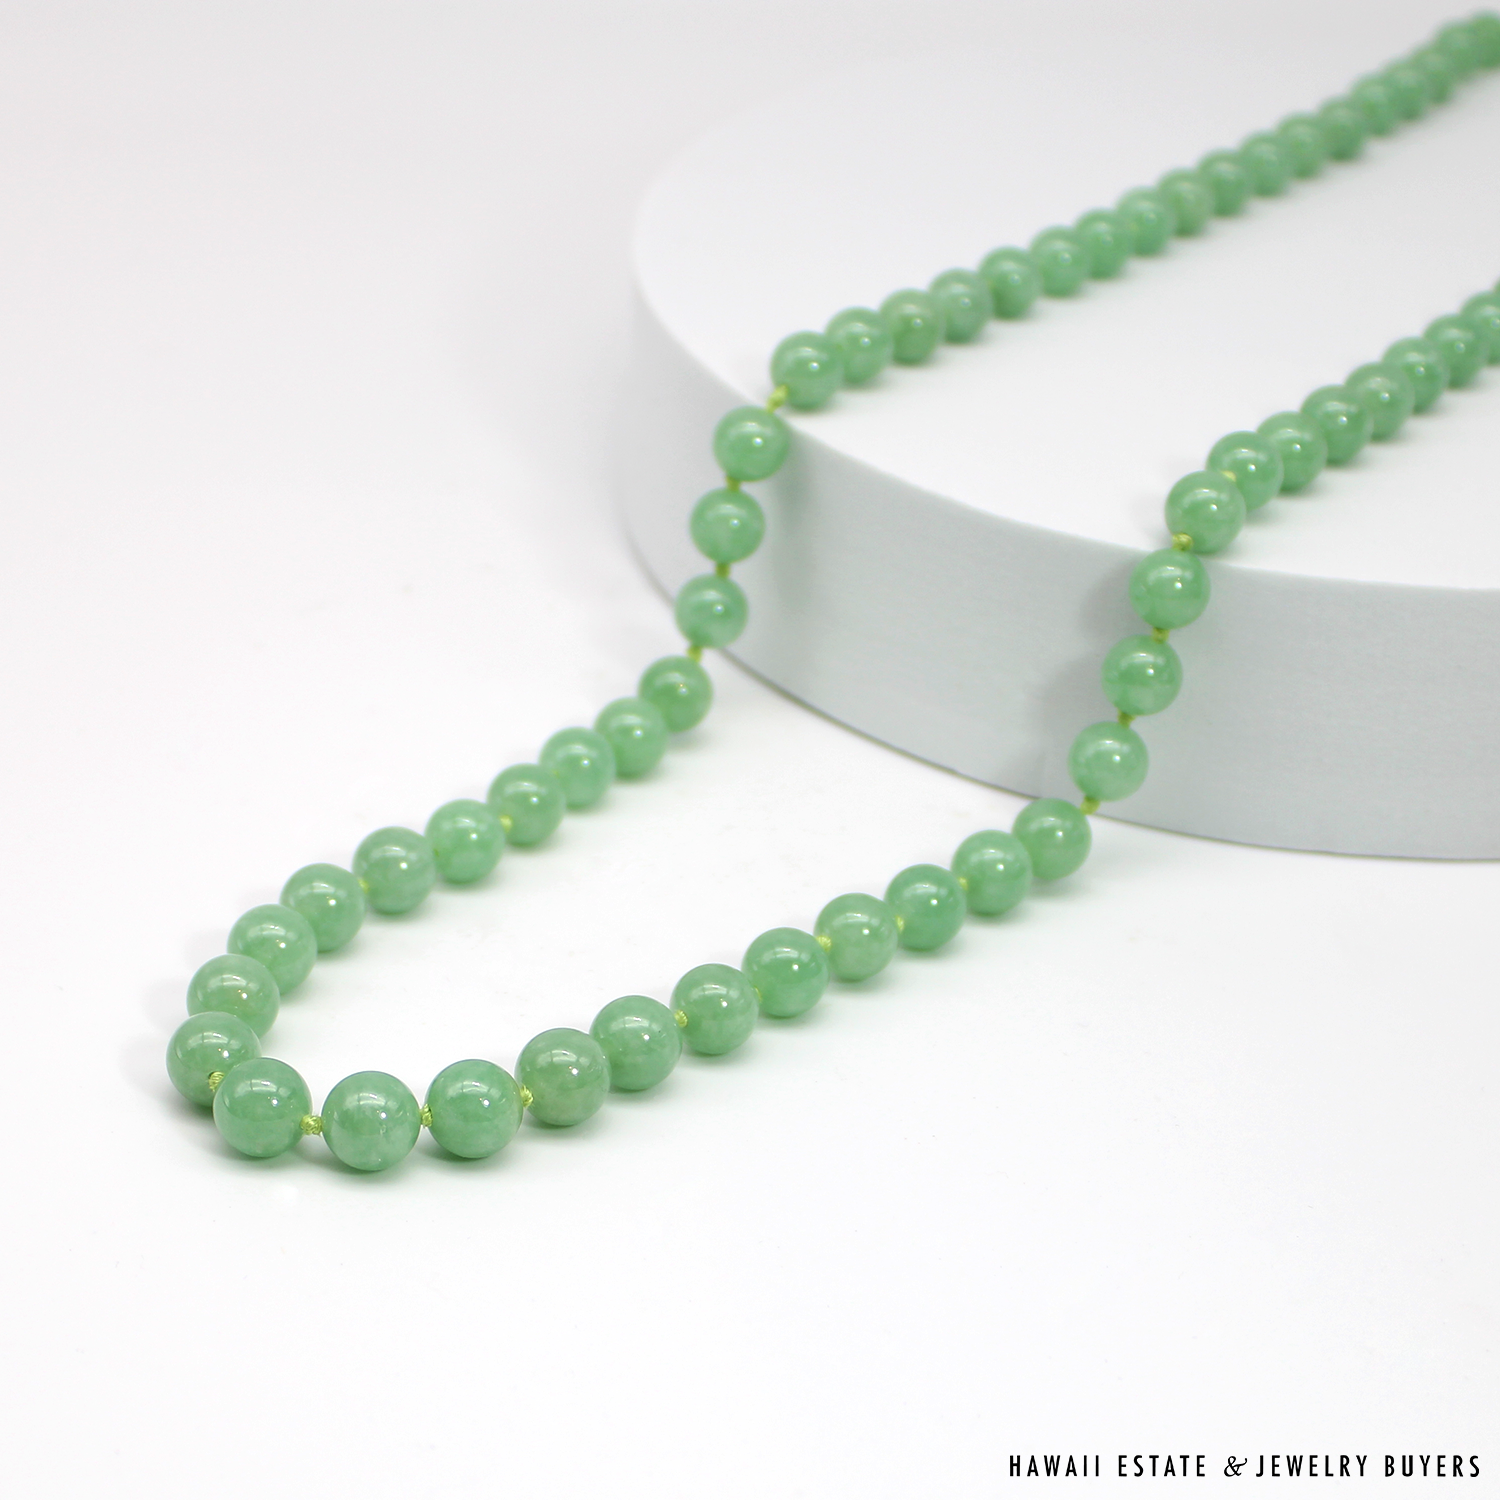 90.8g 14KYG PALE GREEN JADE & APPROX. 0.21CTW DIAMOND BEADED NECKLACE 31  INCH - Hawaii Estate & Jewelry Buyers